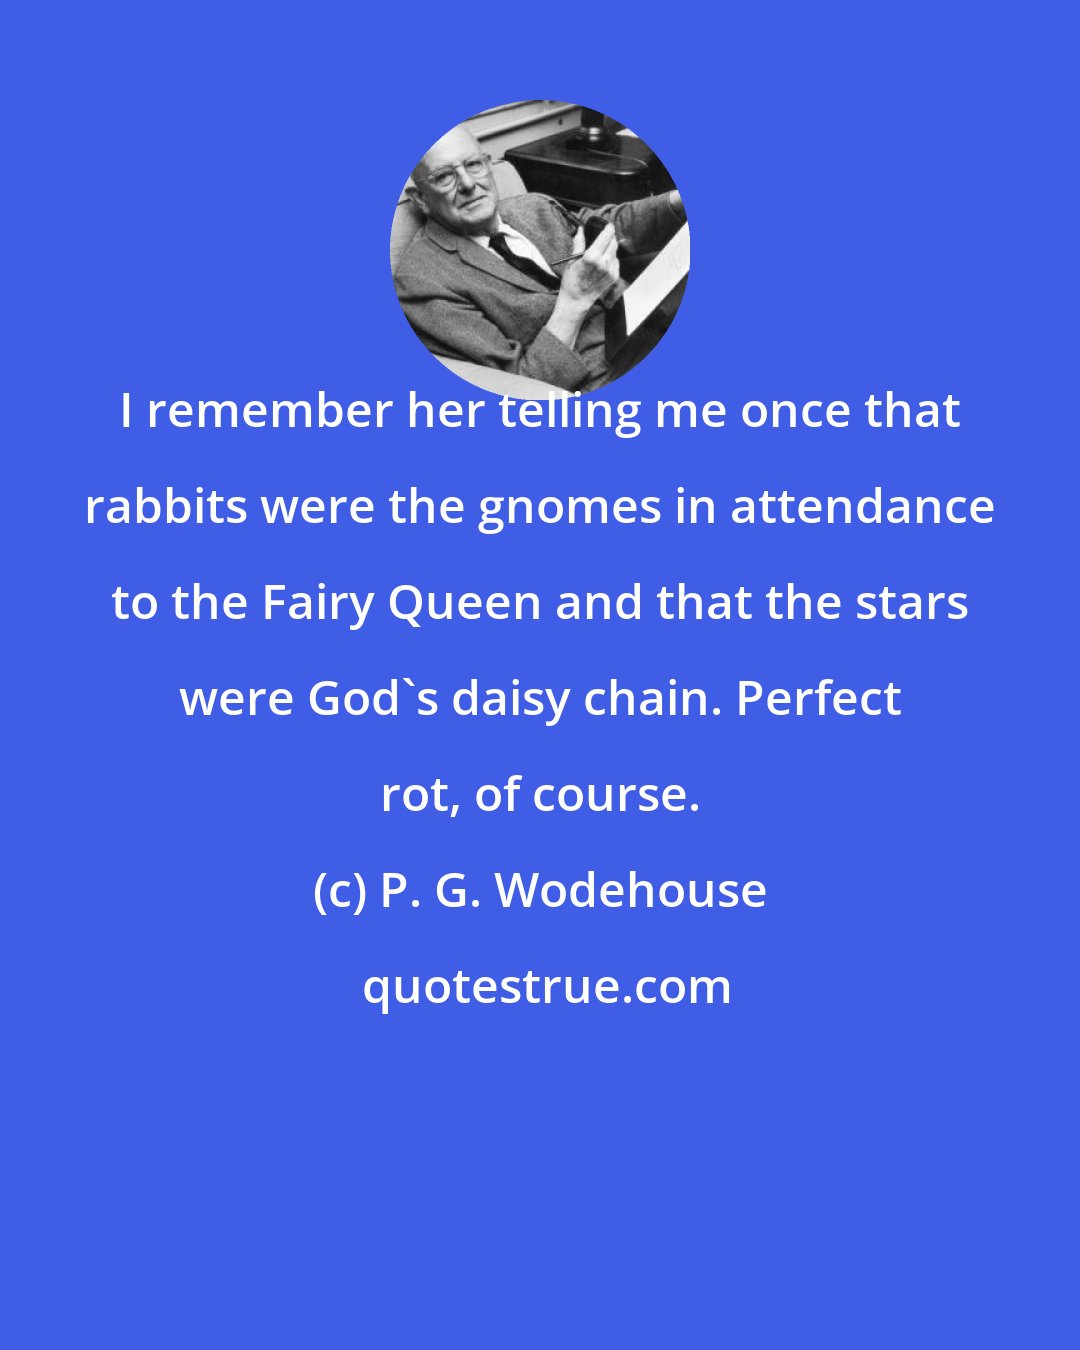 P. G. Wodehouse: I remember her telling me once that rabbits were the gnomes in attendance to the Fairy Queen and that the stars were God's daisy chain. Perfect rot, of course.